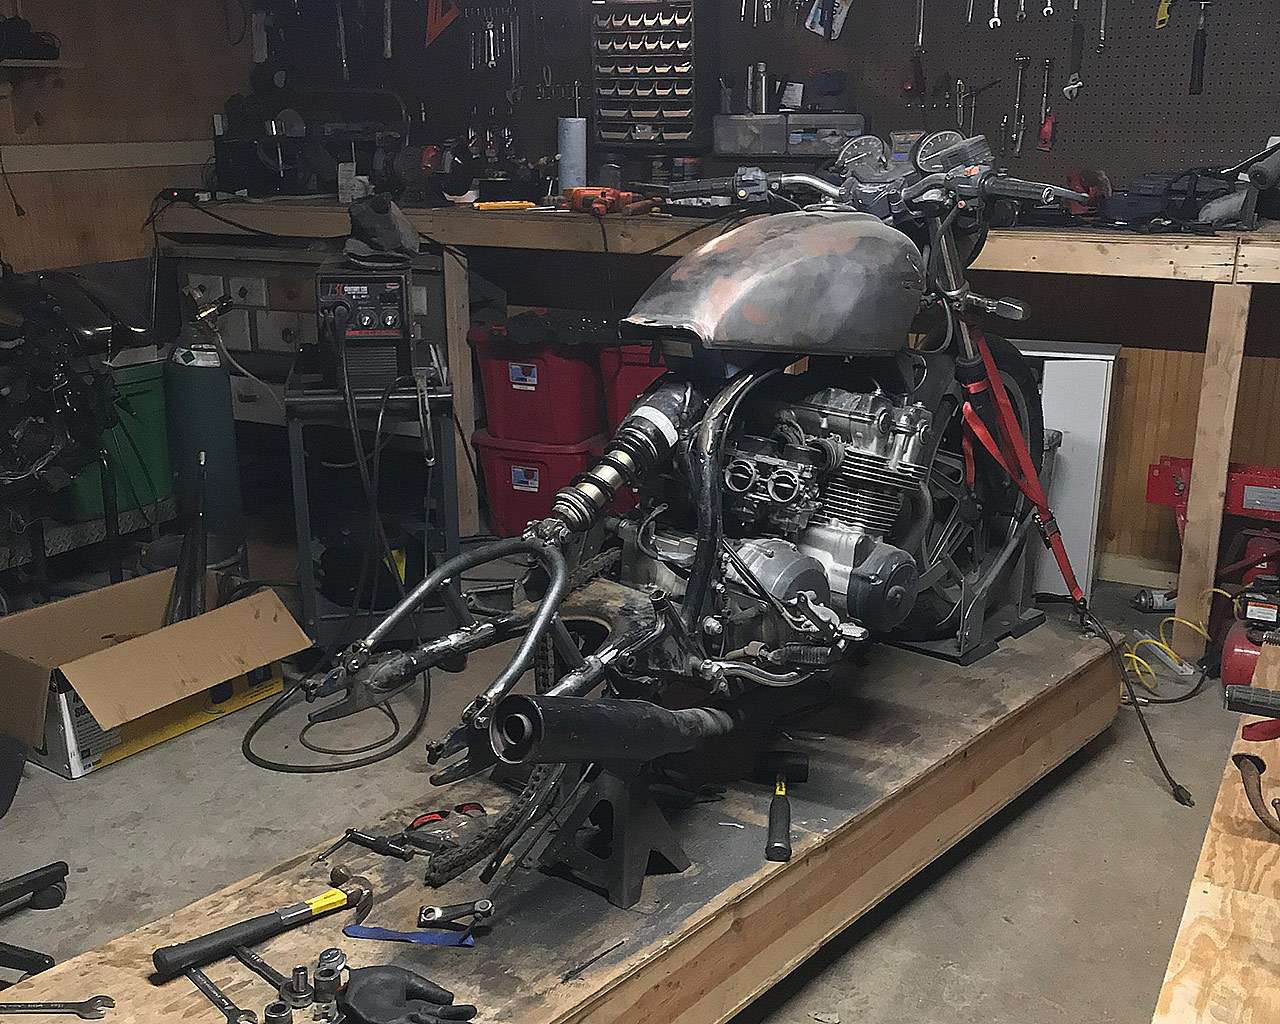 Finished fabricating the monoshock for this CB750